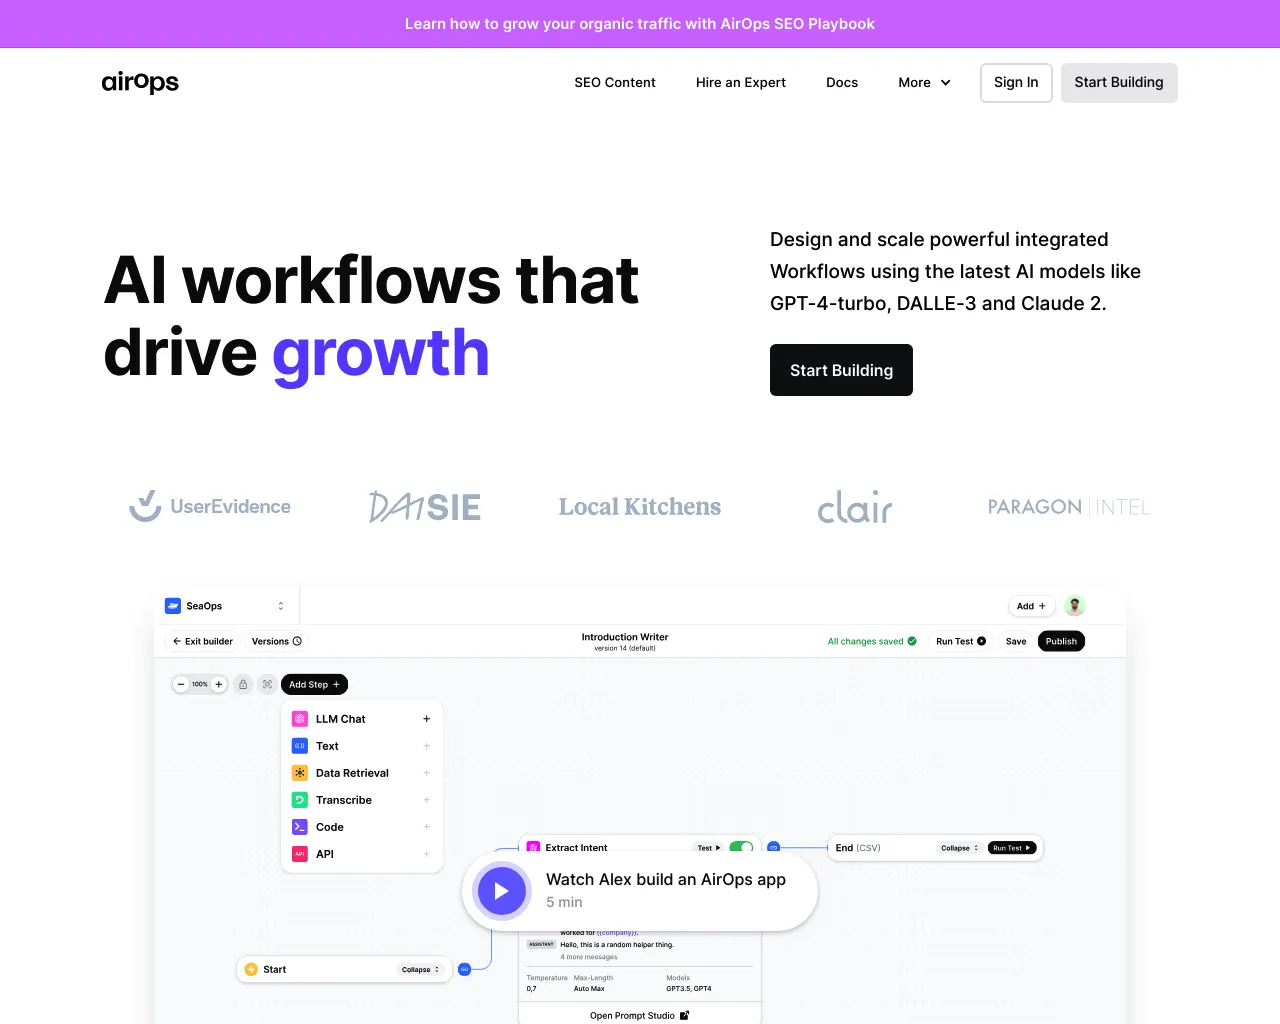 AirOps - AI workflows that drive growth